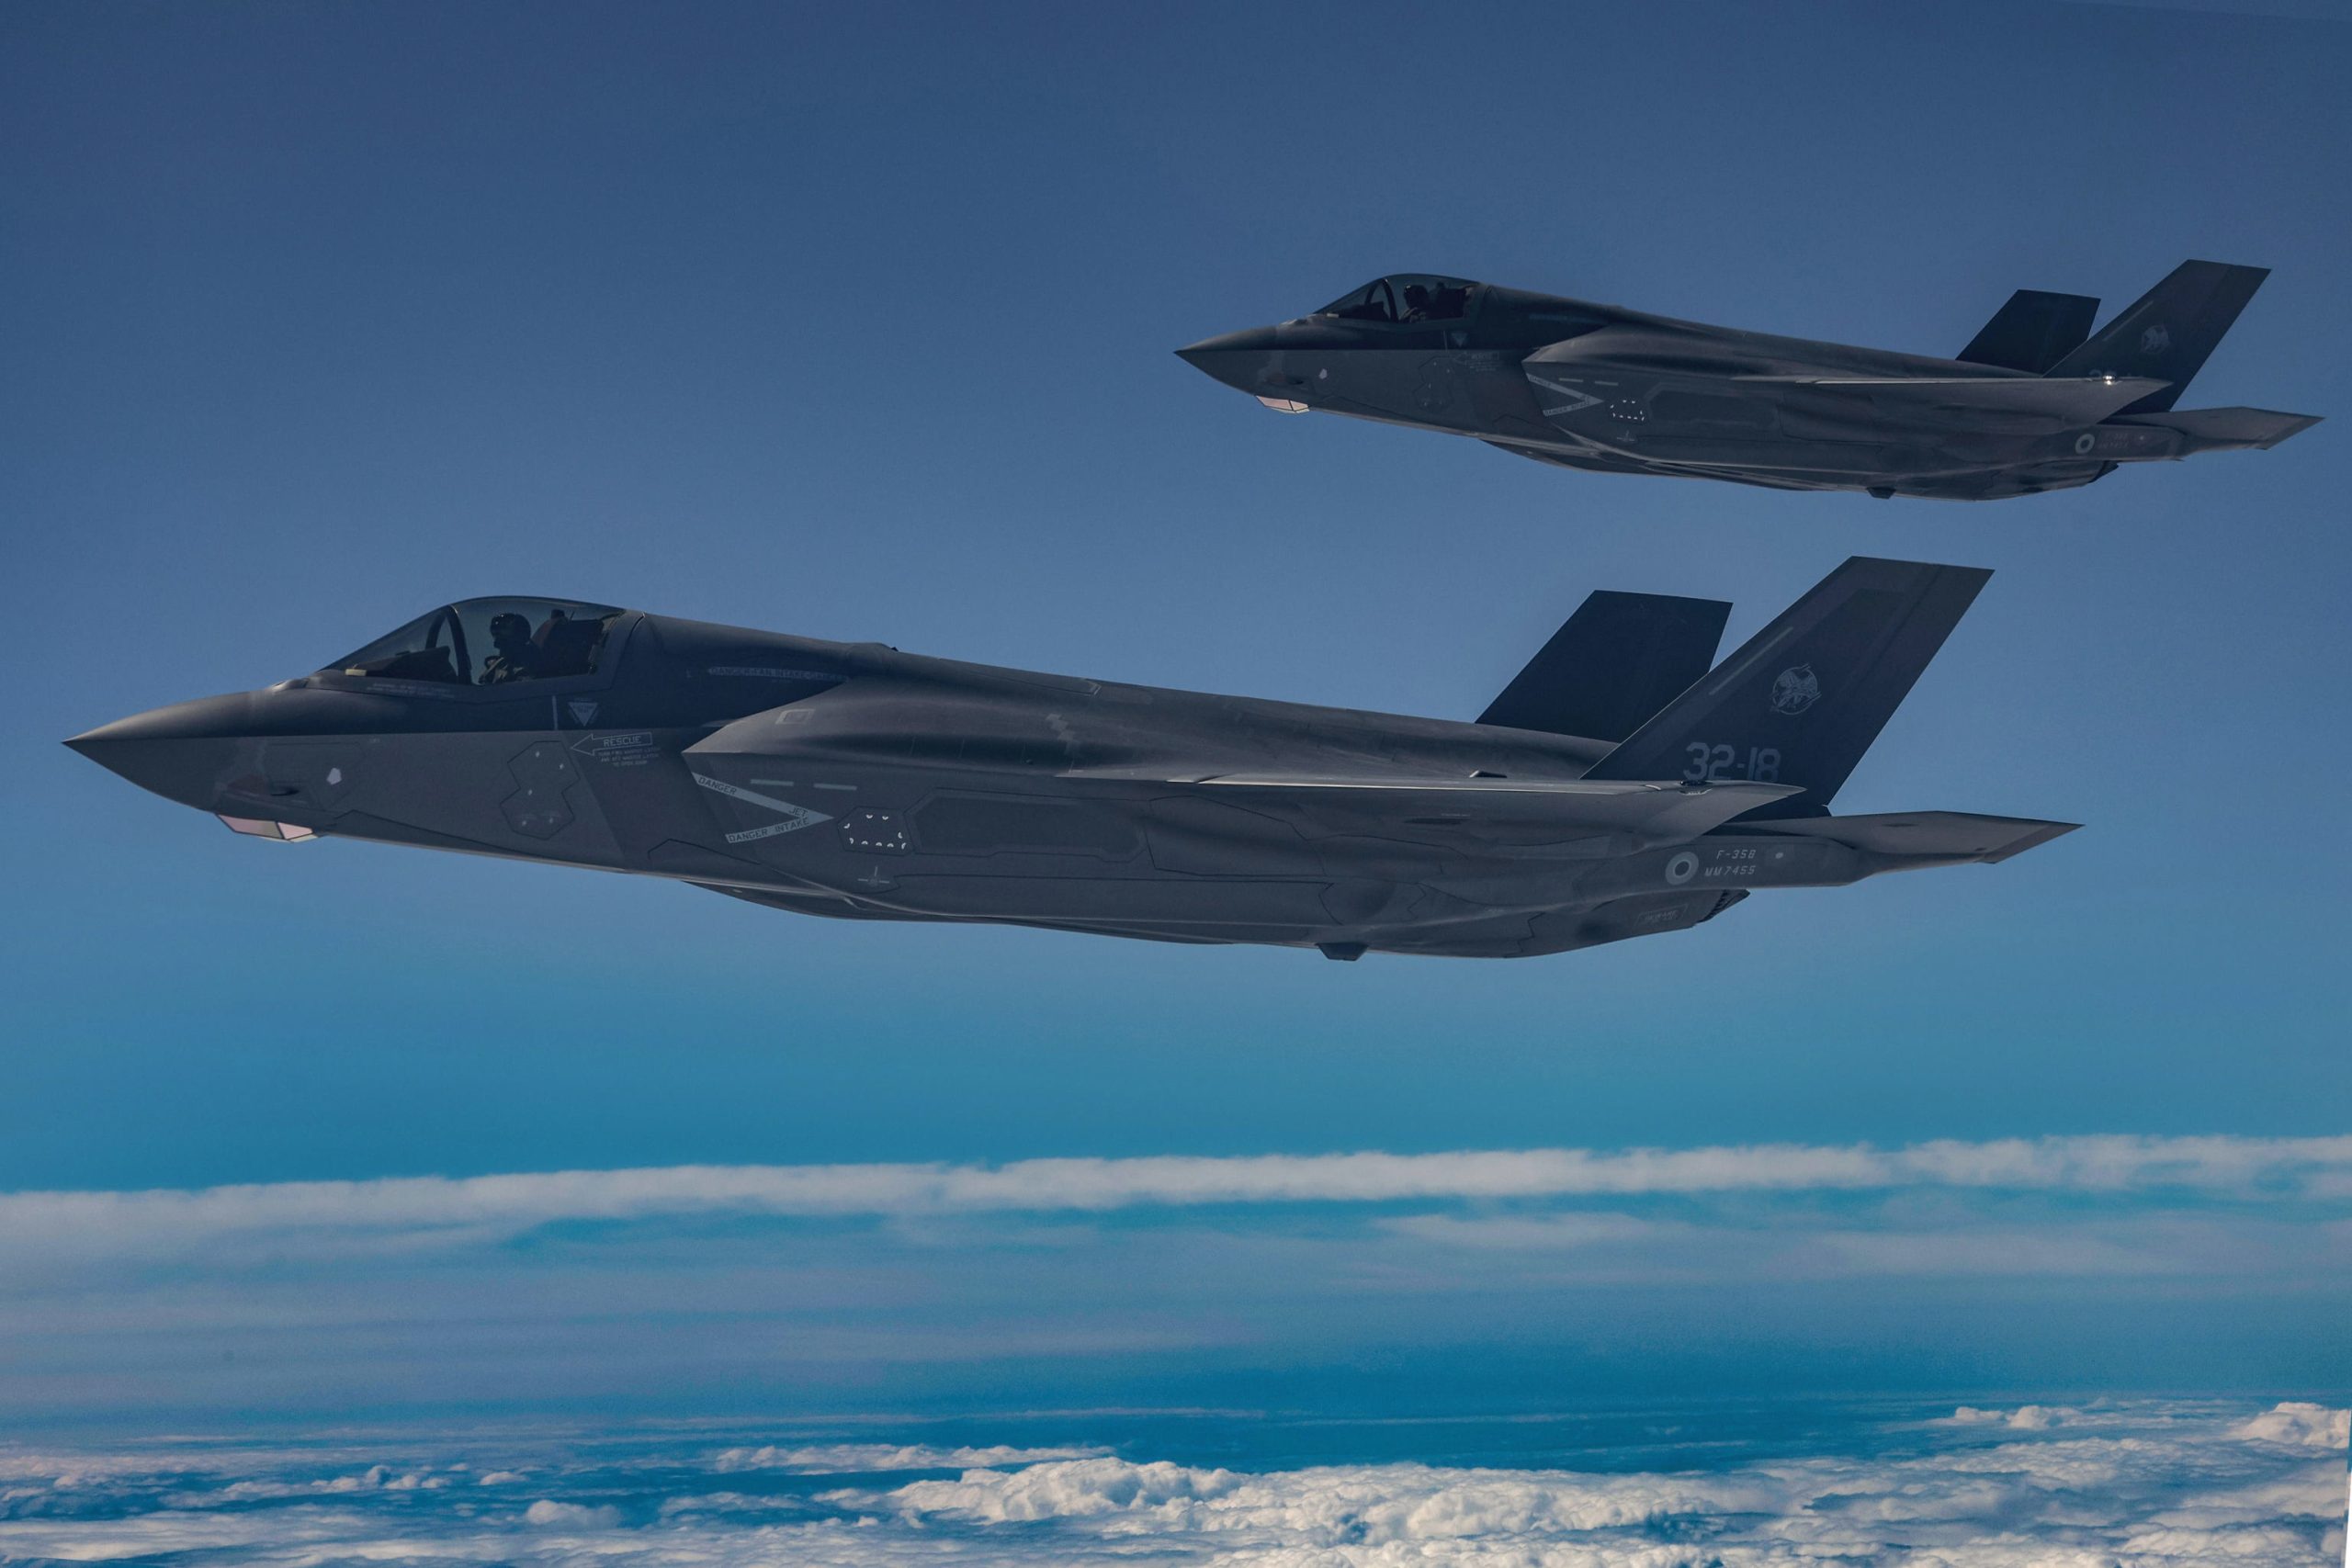 epa10037129 Two Italian Air Force F-35A multirole combat aircraft fly at an undisclosed location during the NATO-led defense operation 'Air Policing Northern Lightning III' from the Keflavik Air Base in Iceland, 27 June 2022. A squad of four F-35A aircraft of the 32nd Wing of the Italian Air Force joined the operation which aims at preserving 'the integrity of NATO's airspace in peacetime by strengthening the surveillance of the skies of Iceland'. Italy's Minister of Defense Lorenzo Guerini in a press release by his Ministry on 14 June was cited as saying that 'Air Policing in Iceland testifies to the crucial Italian contribution to the security of all NATO's European chessboards'.  EPA/GIUSEPPE LAMI